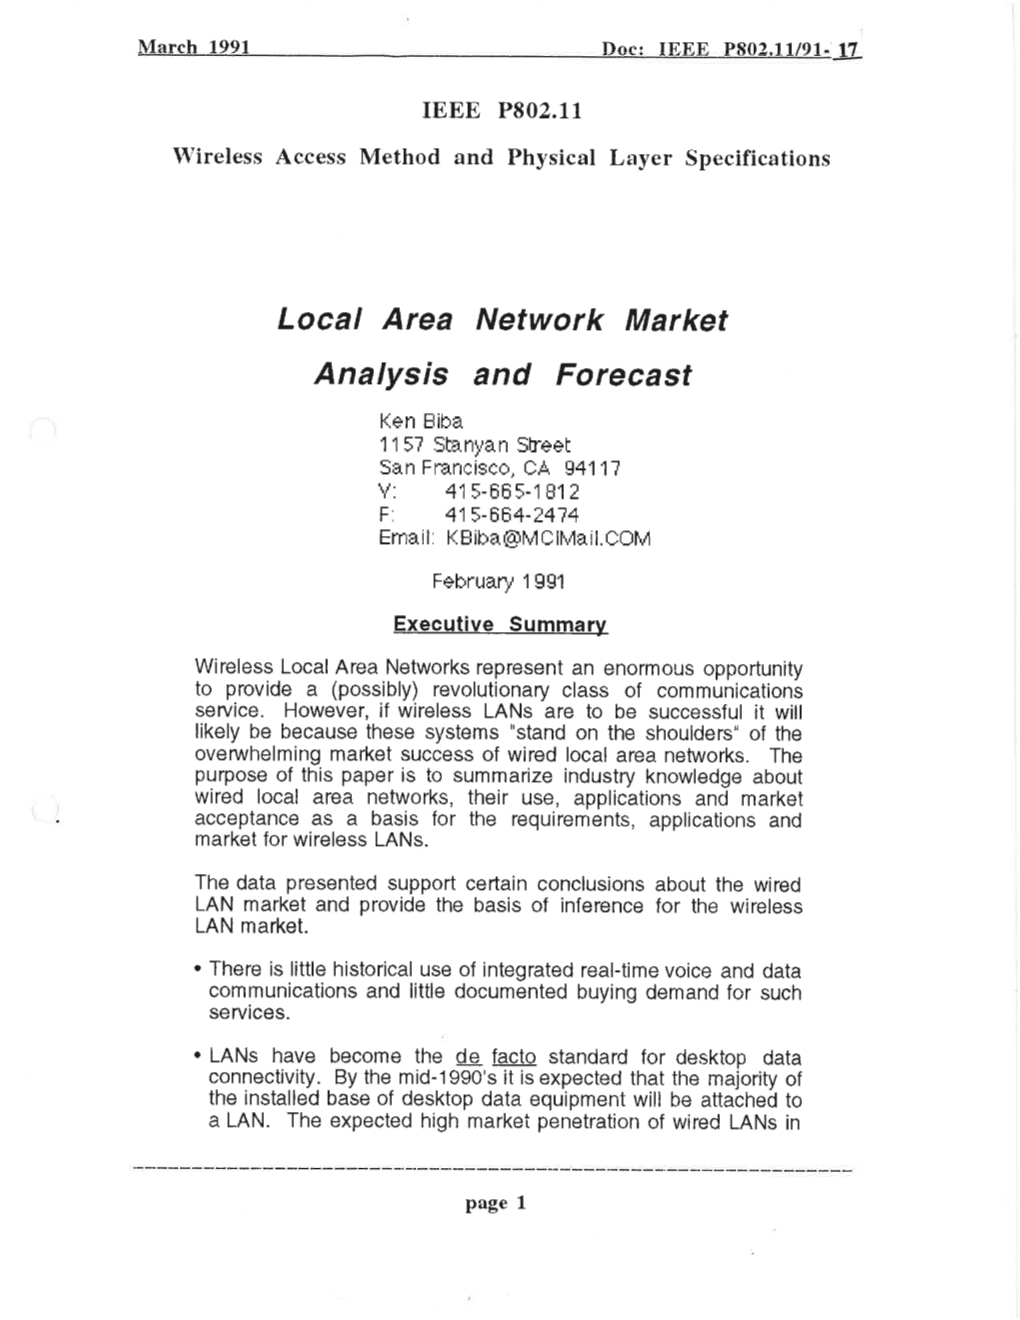 Local Area Network Market Analysis and Forecast